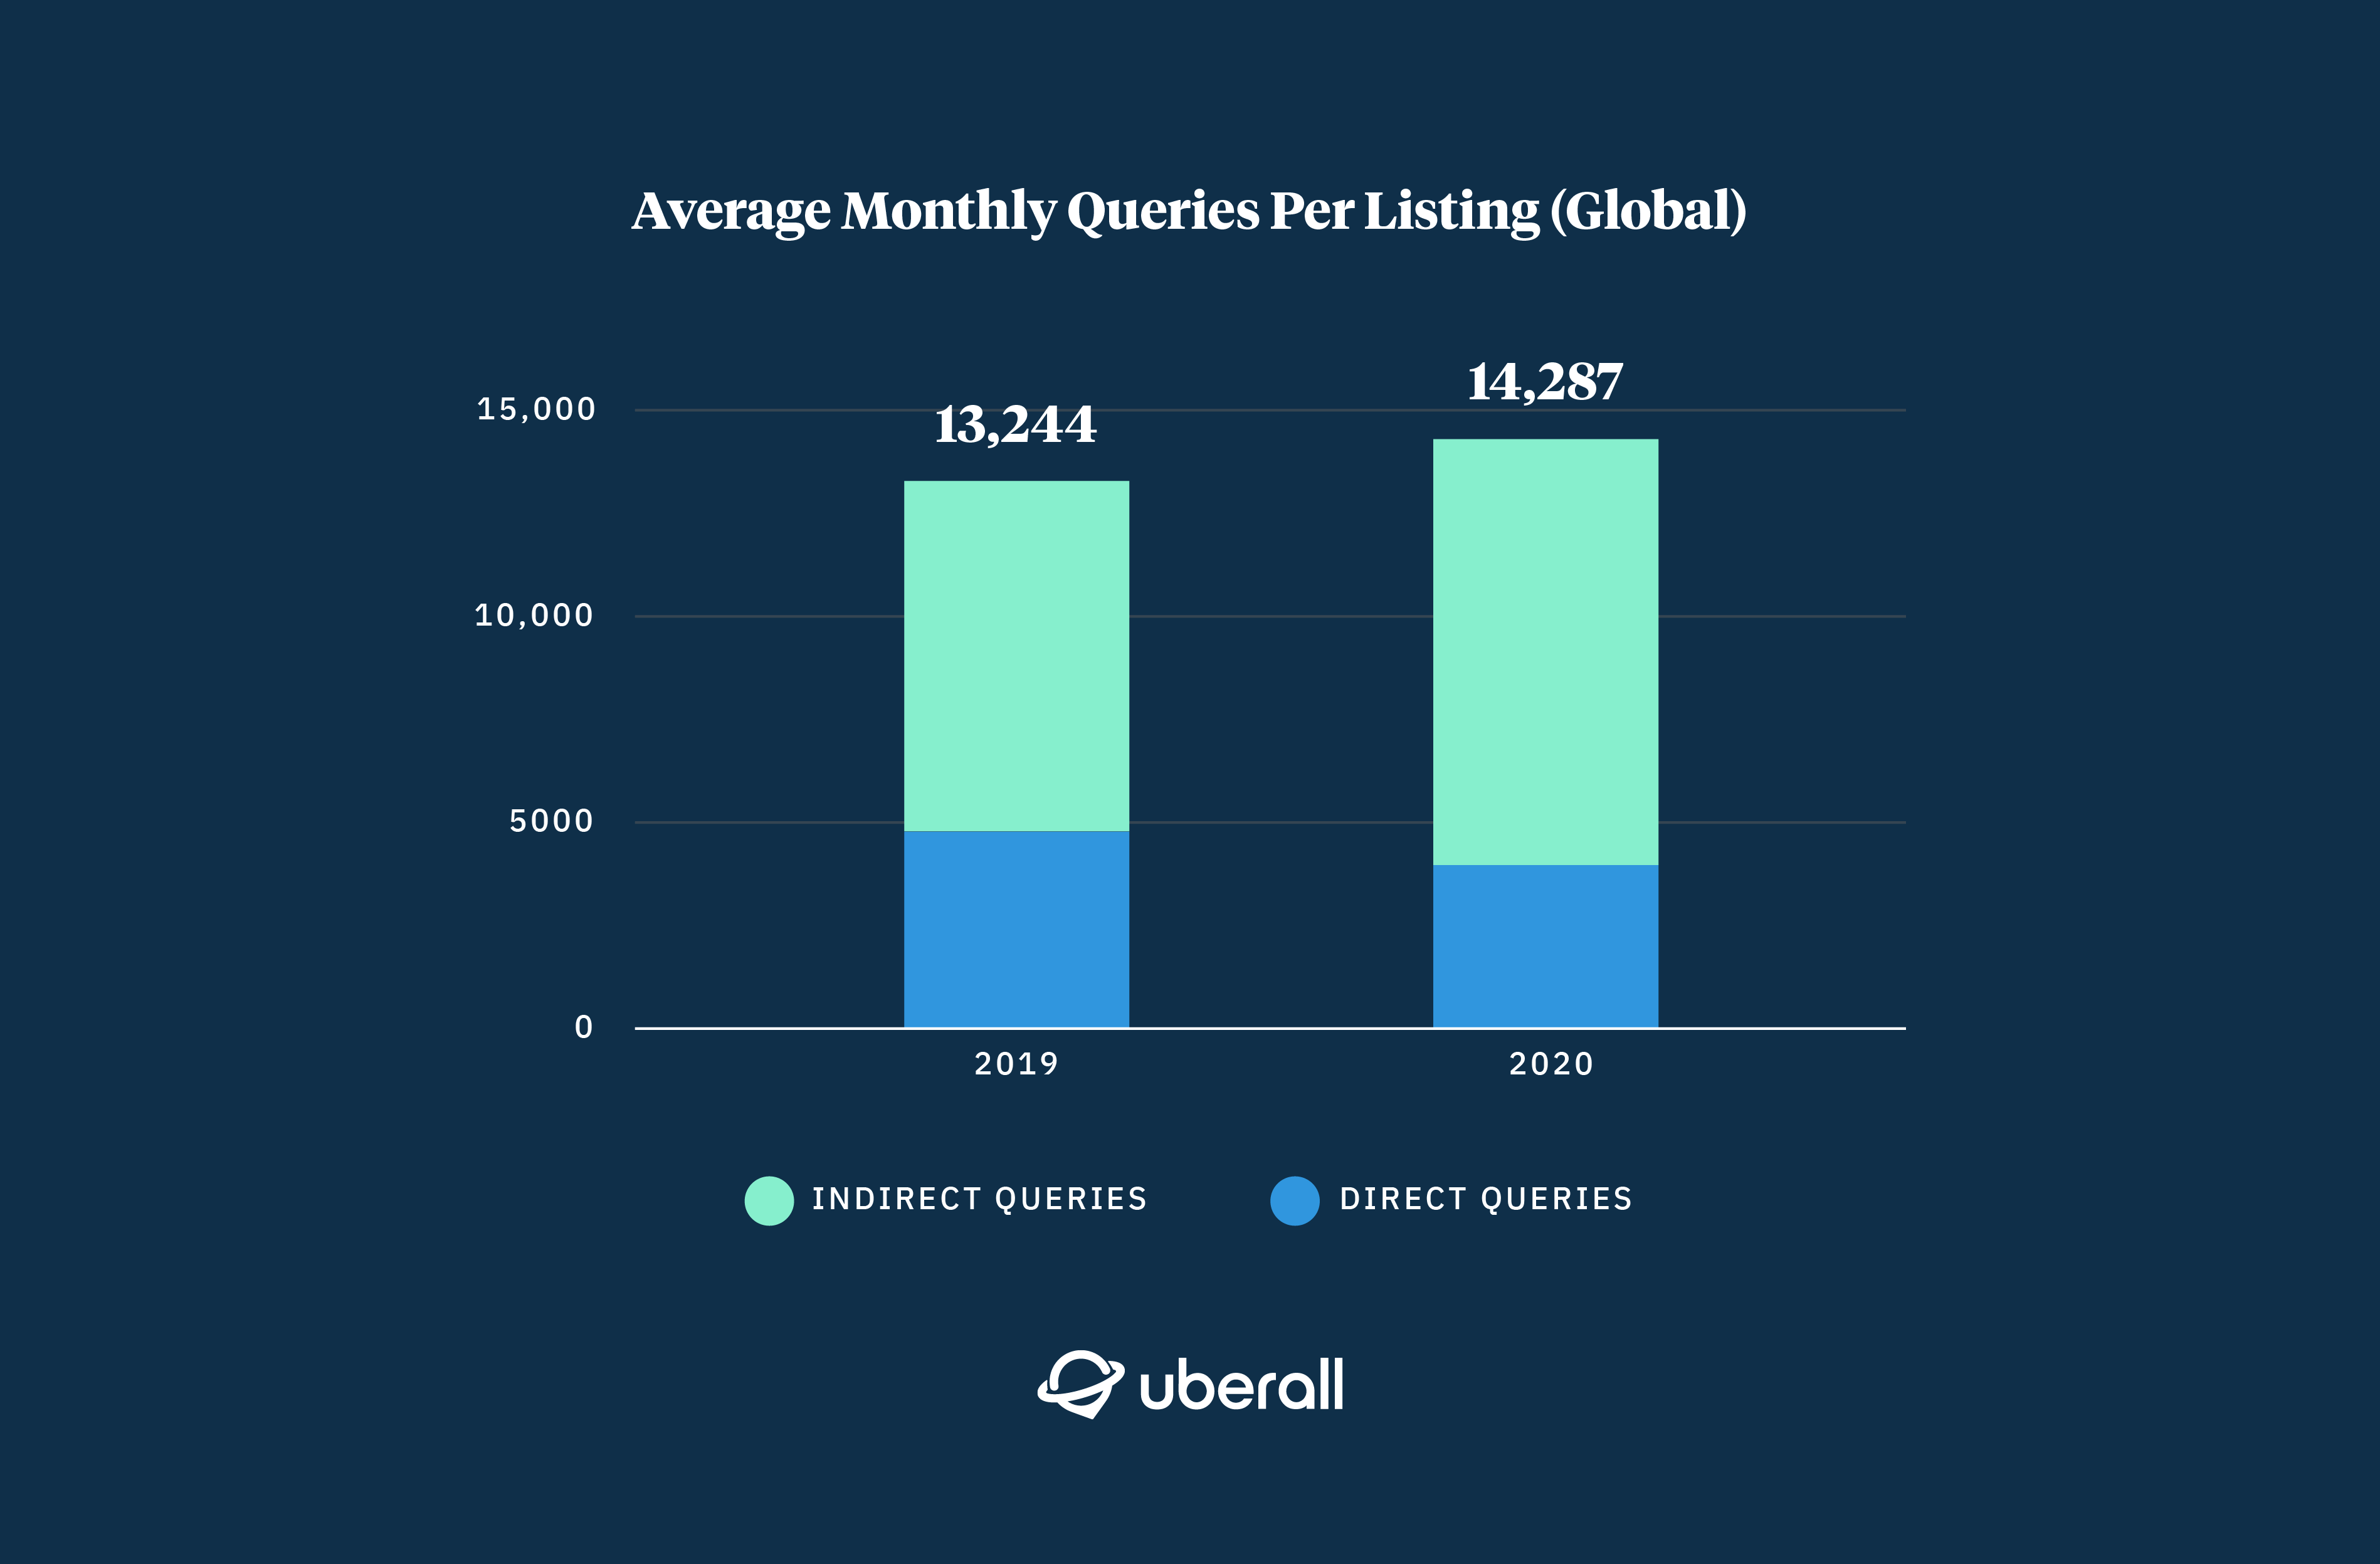 Average monthly queries per listing on a global level in 2020 vs 2019